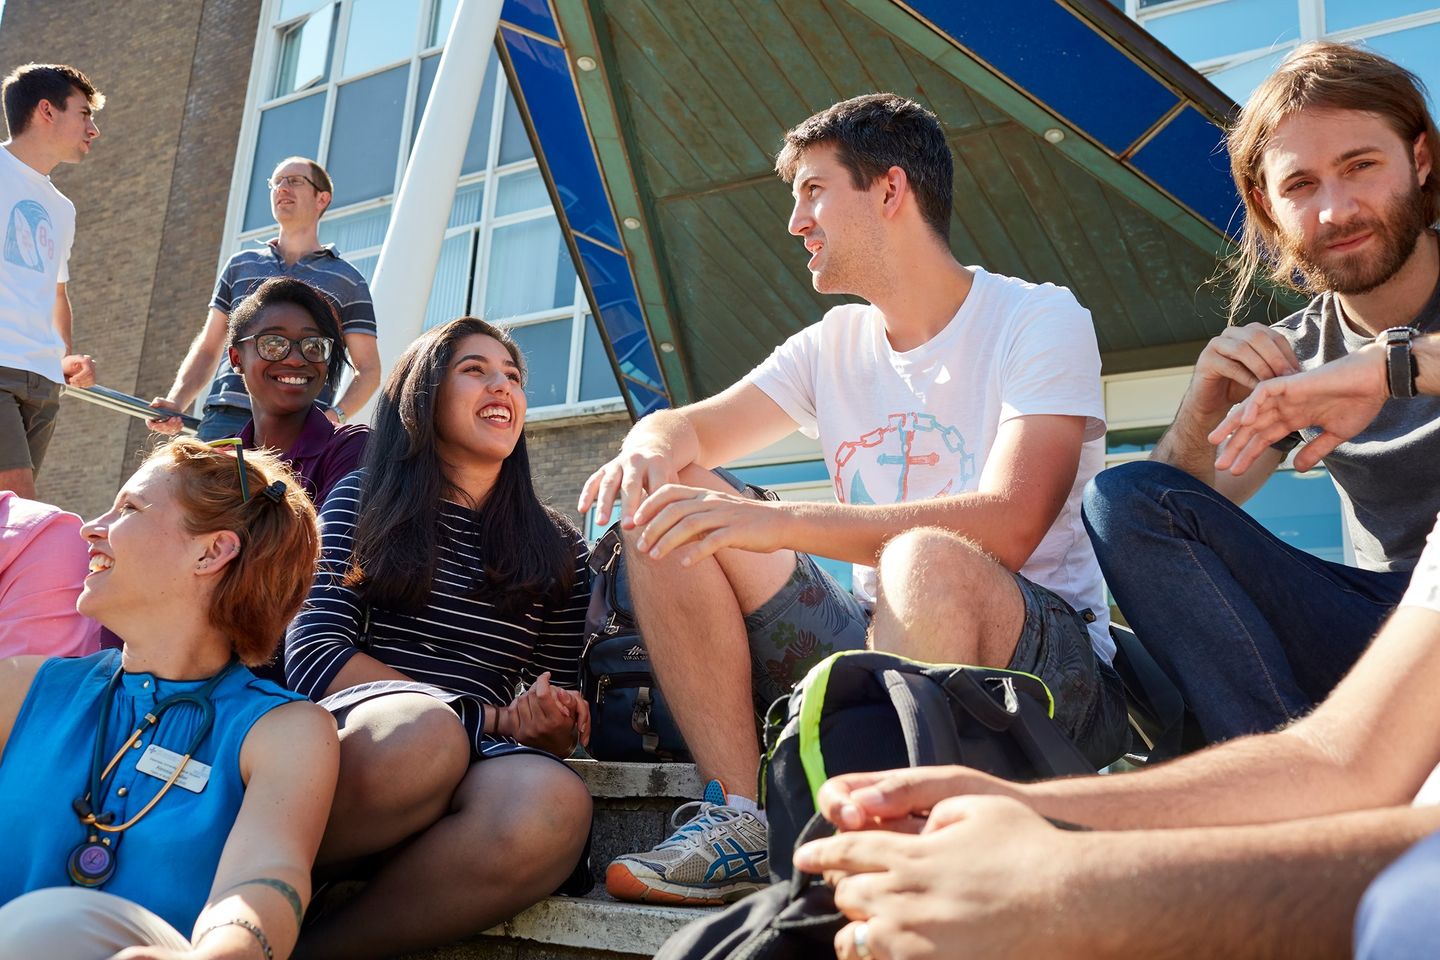 Students sitting on step